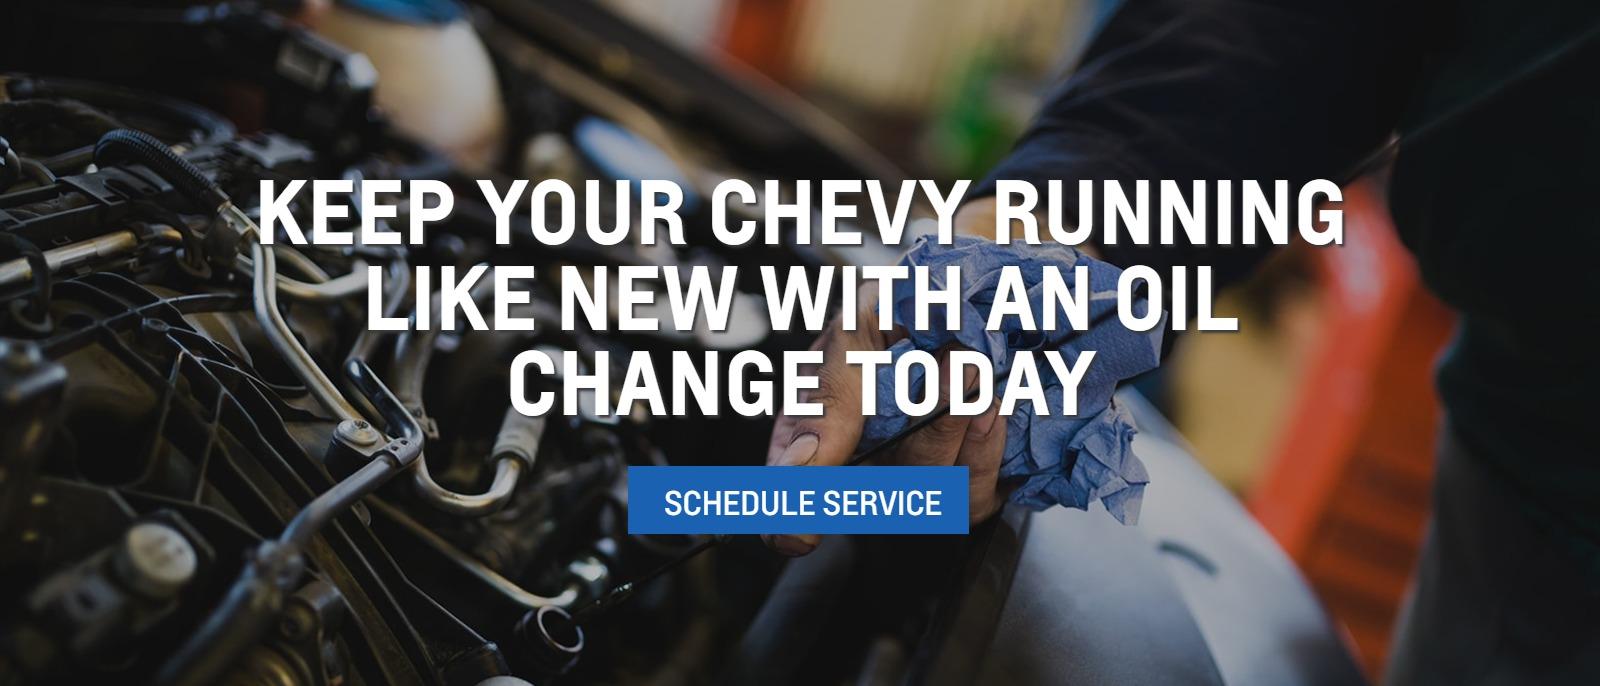 Keep your Chevy running like new with an oil change today